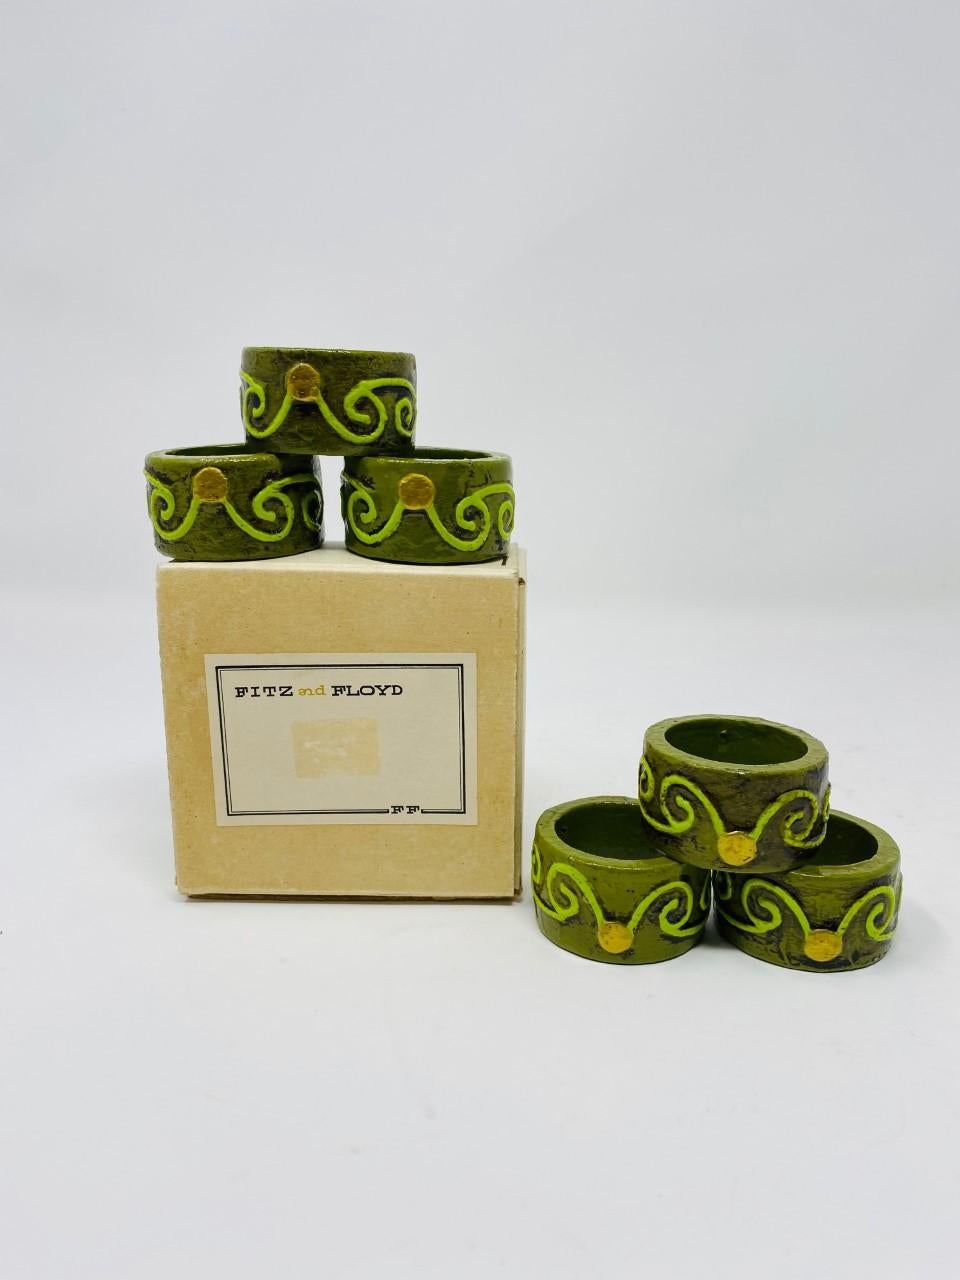 Beautiful mid-century set of 6 napking holders by Fitz & Floyd. These set is both chic and nostalgic. Each napking holder is in great condition and is stylized in its original mid-century design. A vivid avocado green shade highlights an arabesque